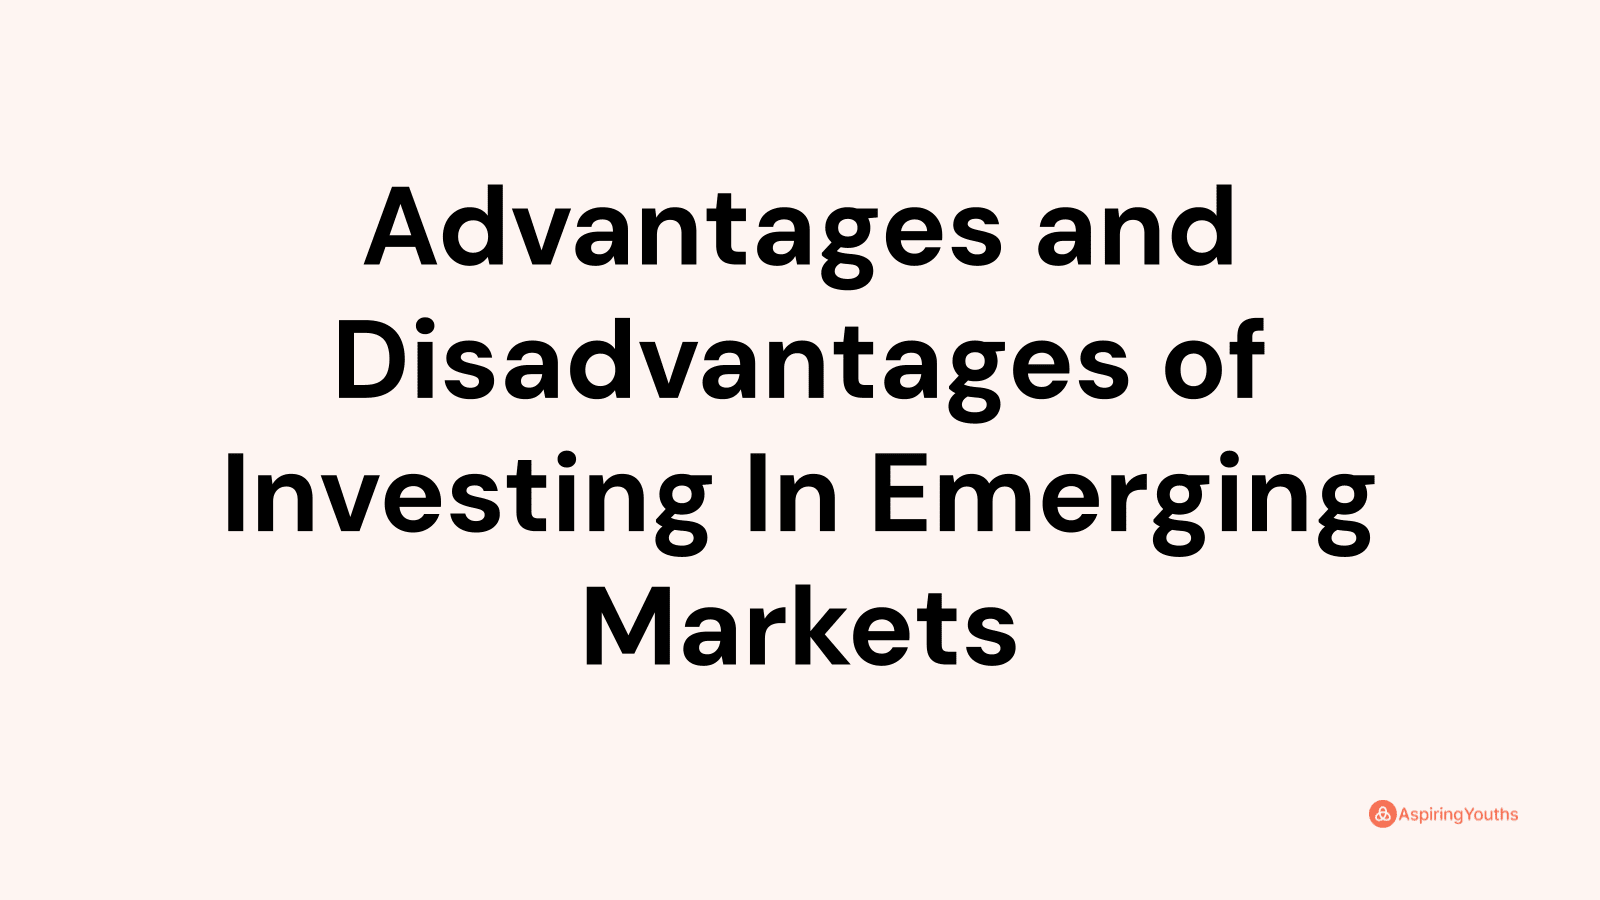 Advantages and disadvantages of Investing In Emerging Markets